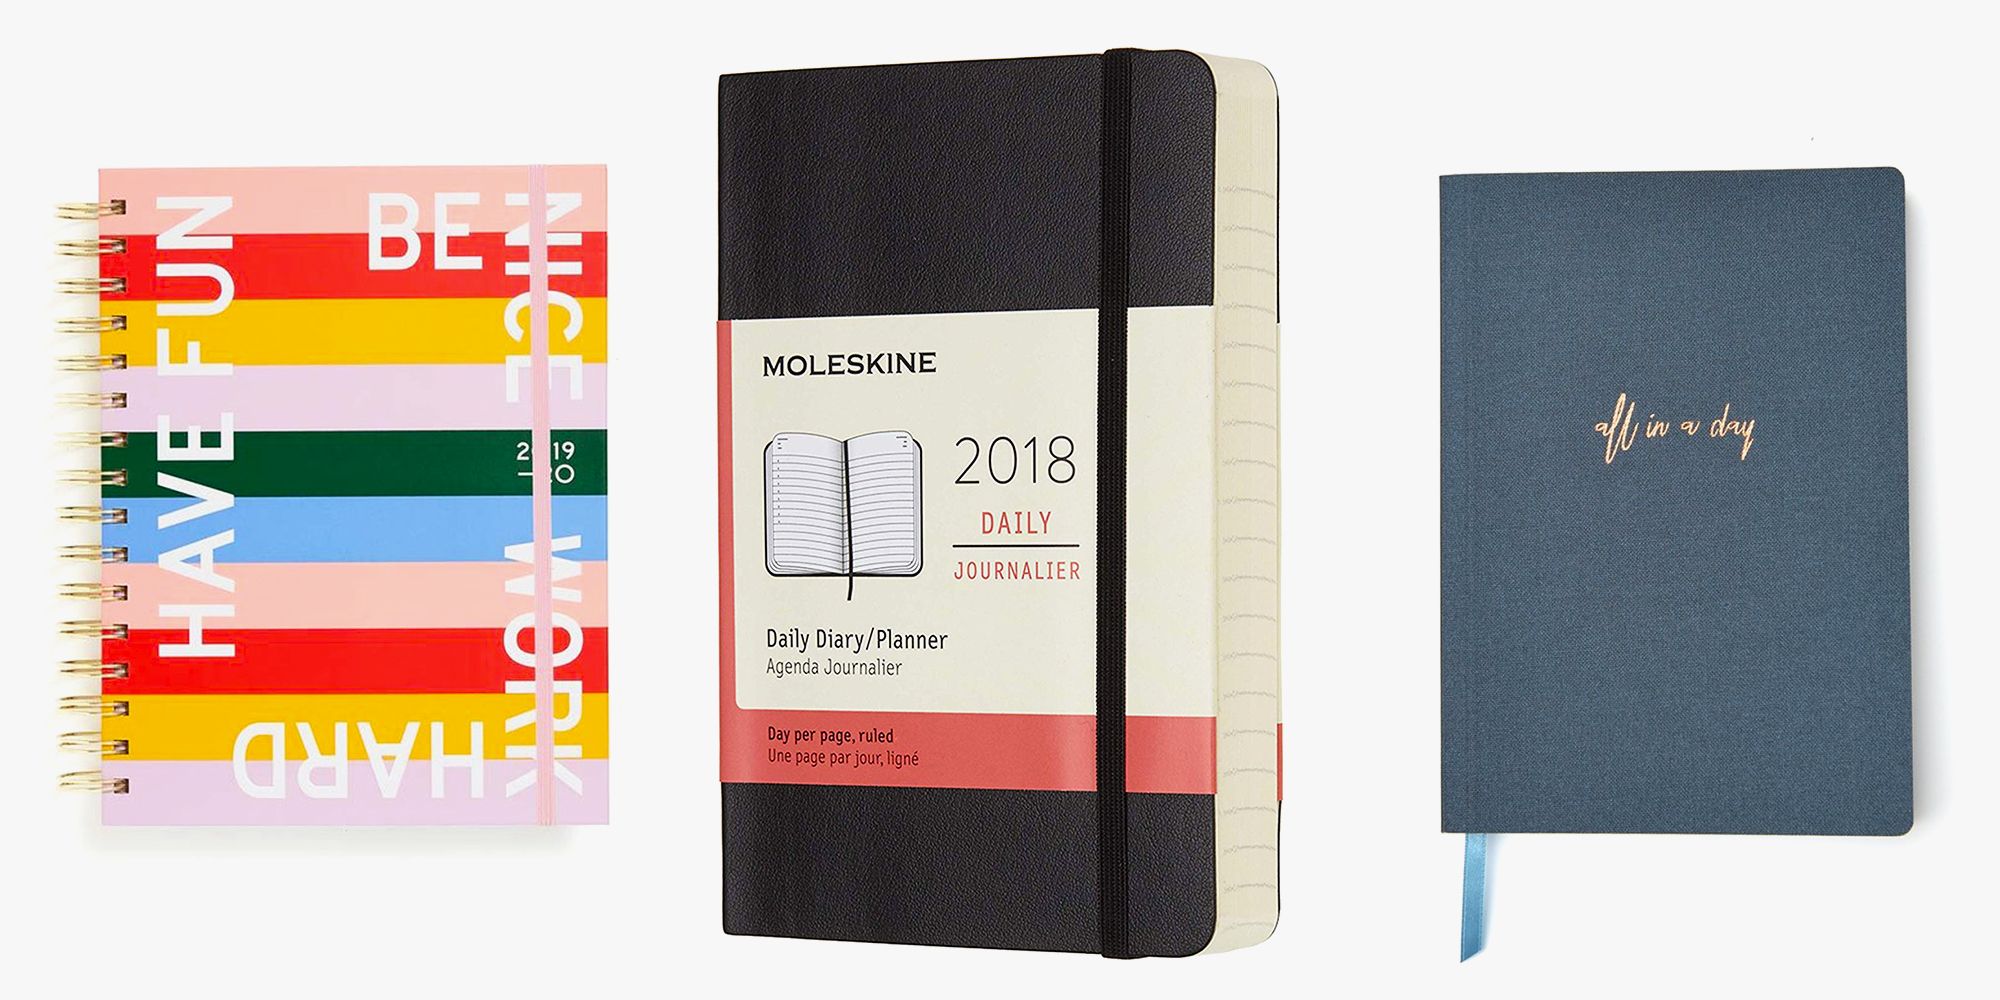 A5 Organise with Style Organiser 2019-2020 Weekly Planner Diary Journal Academic Diary 2019-2020 Doodle Life Planner